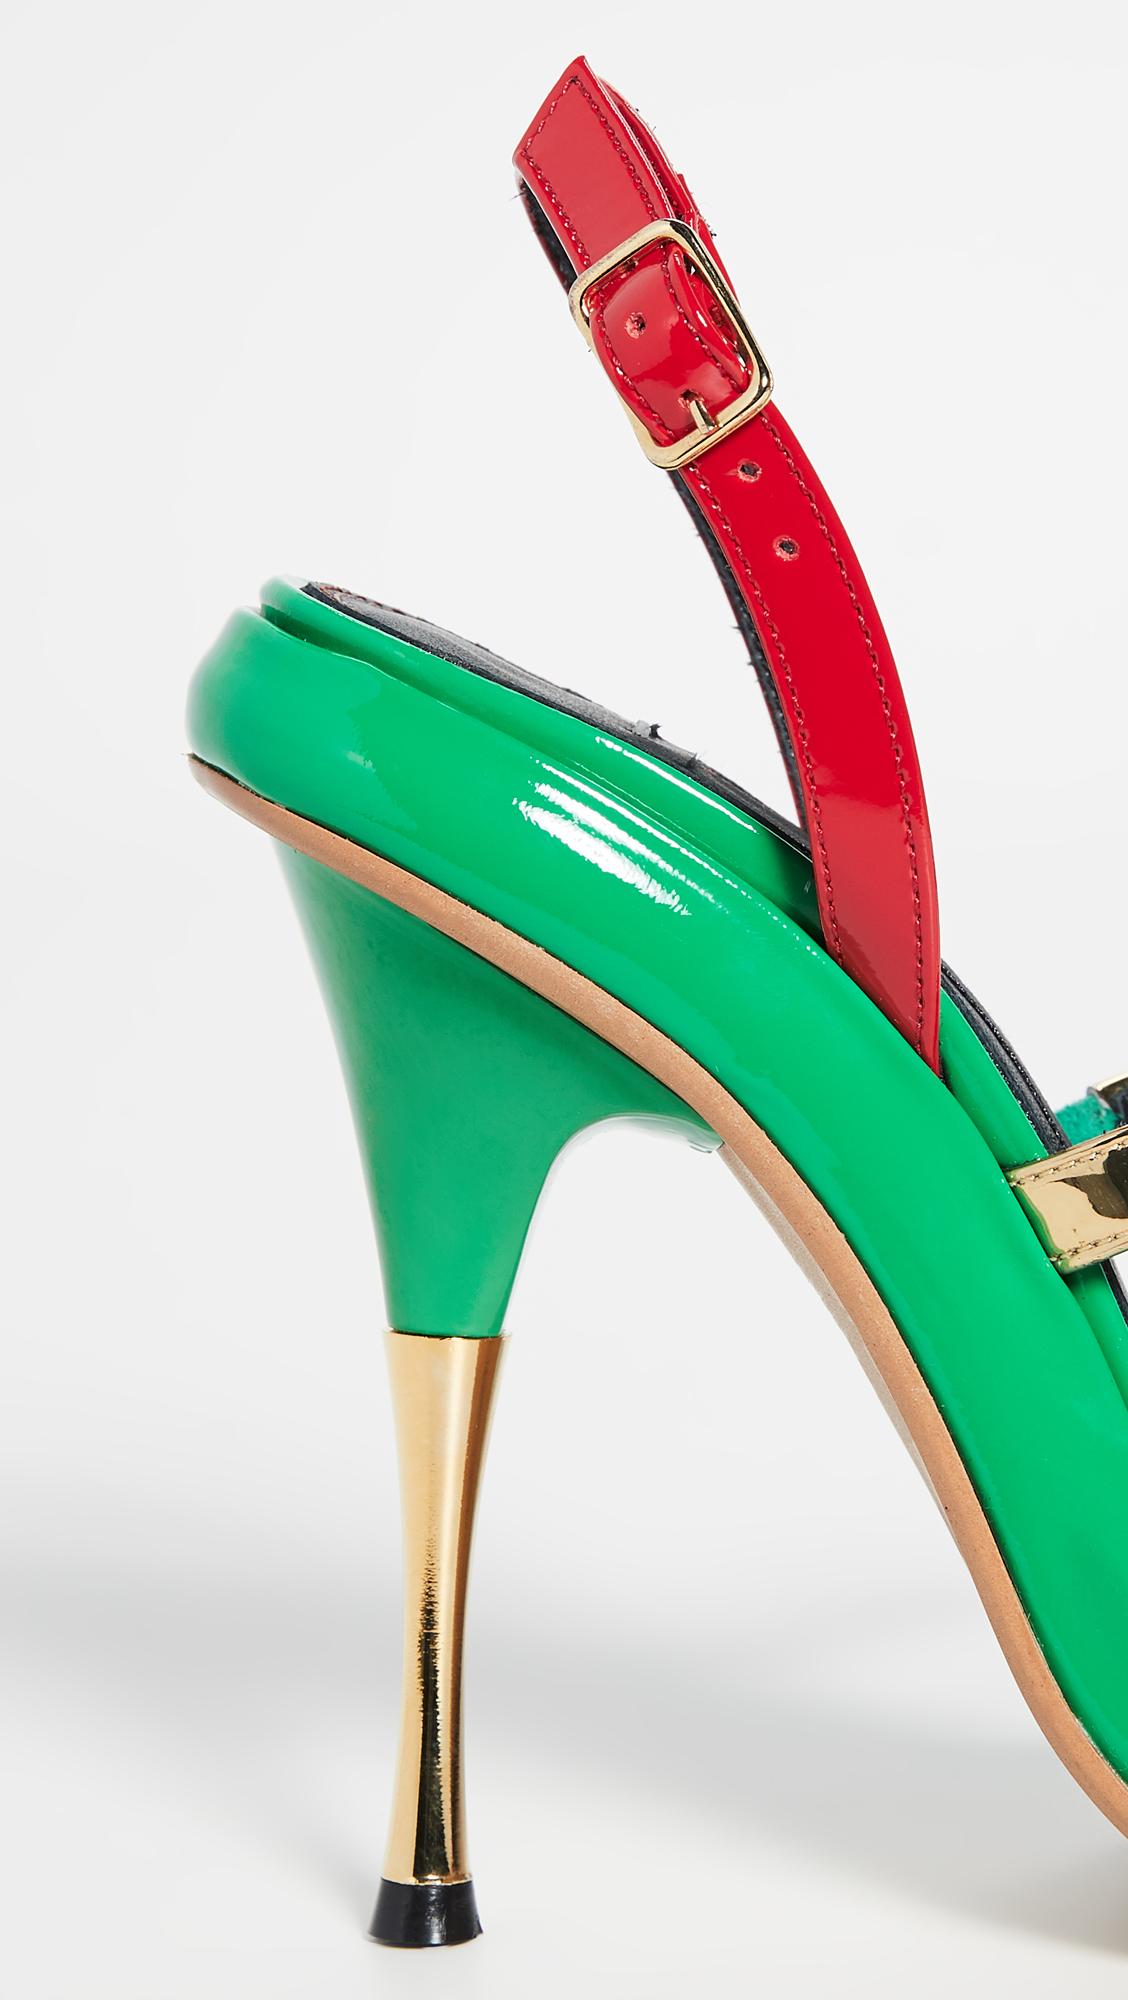 Area Bumper Sandals in Red/Gold/Green (Green) - Lyst